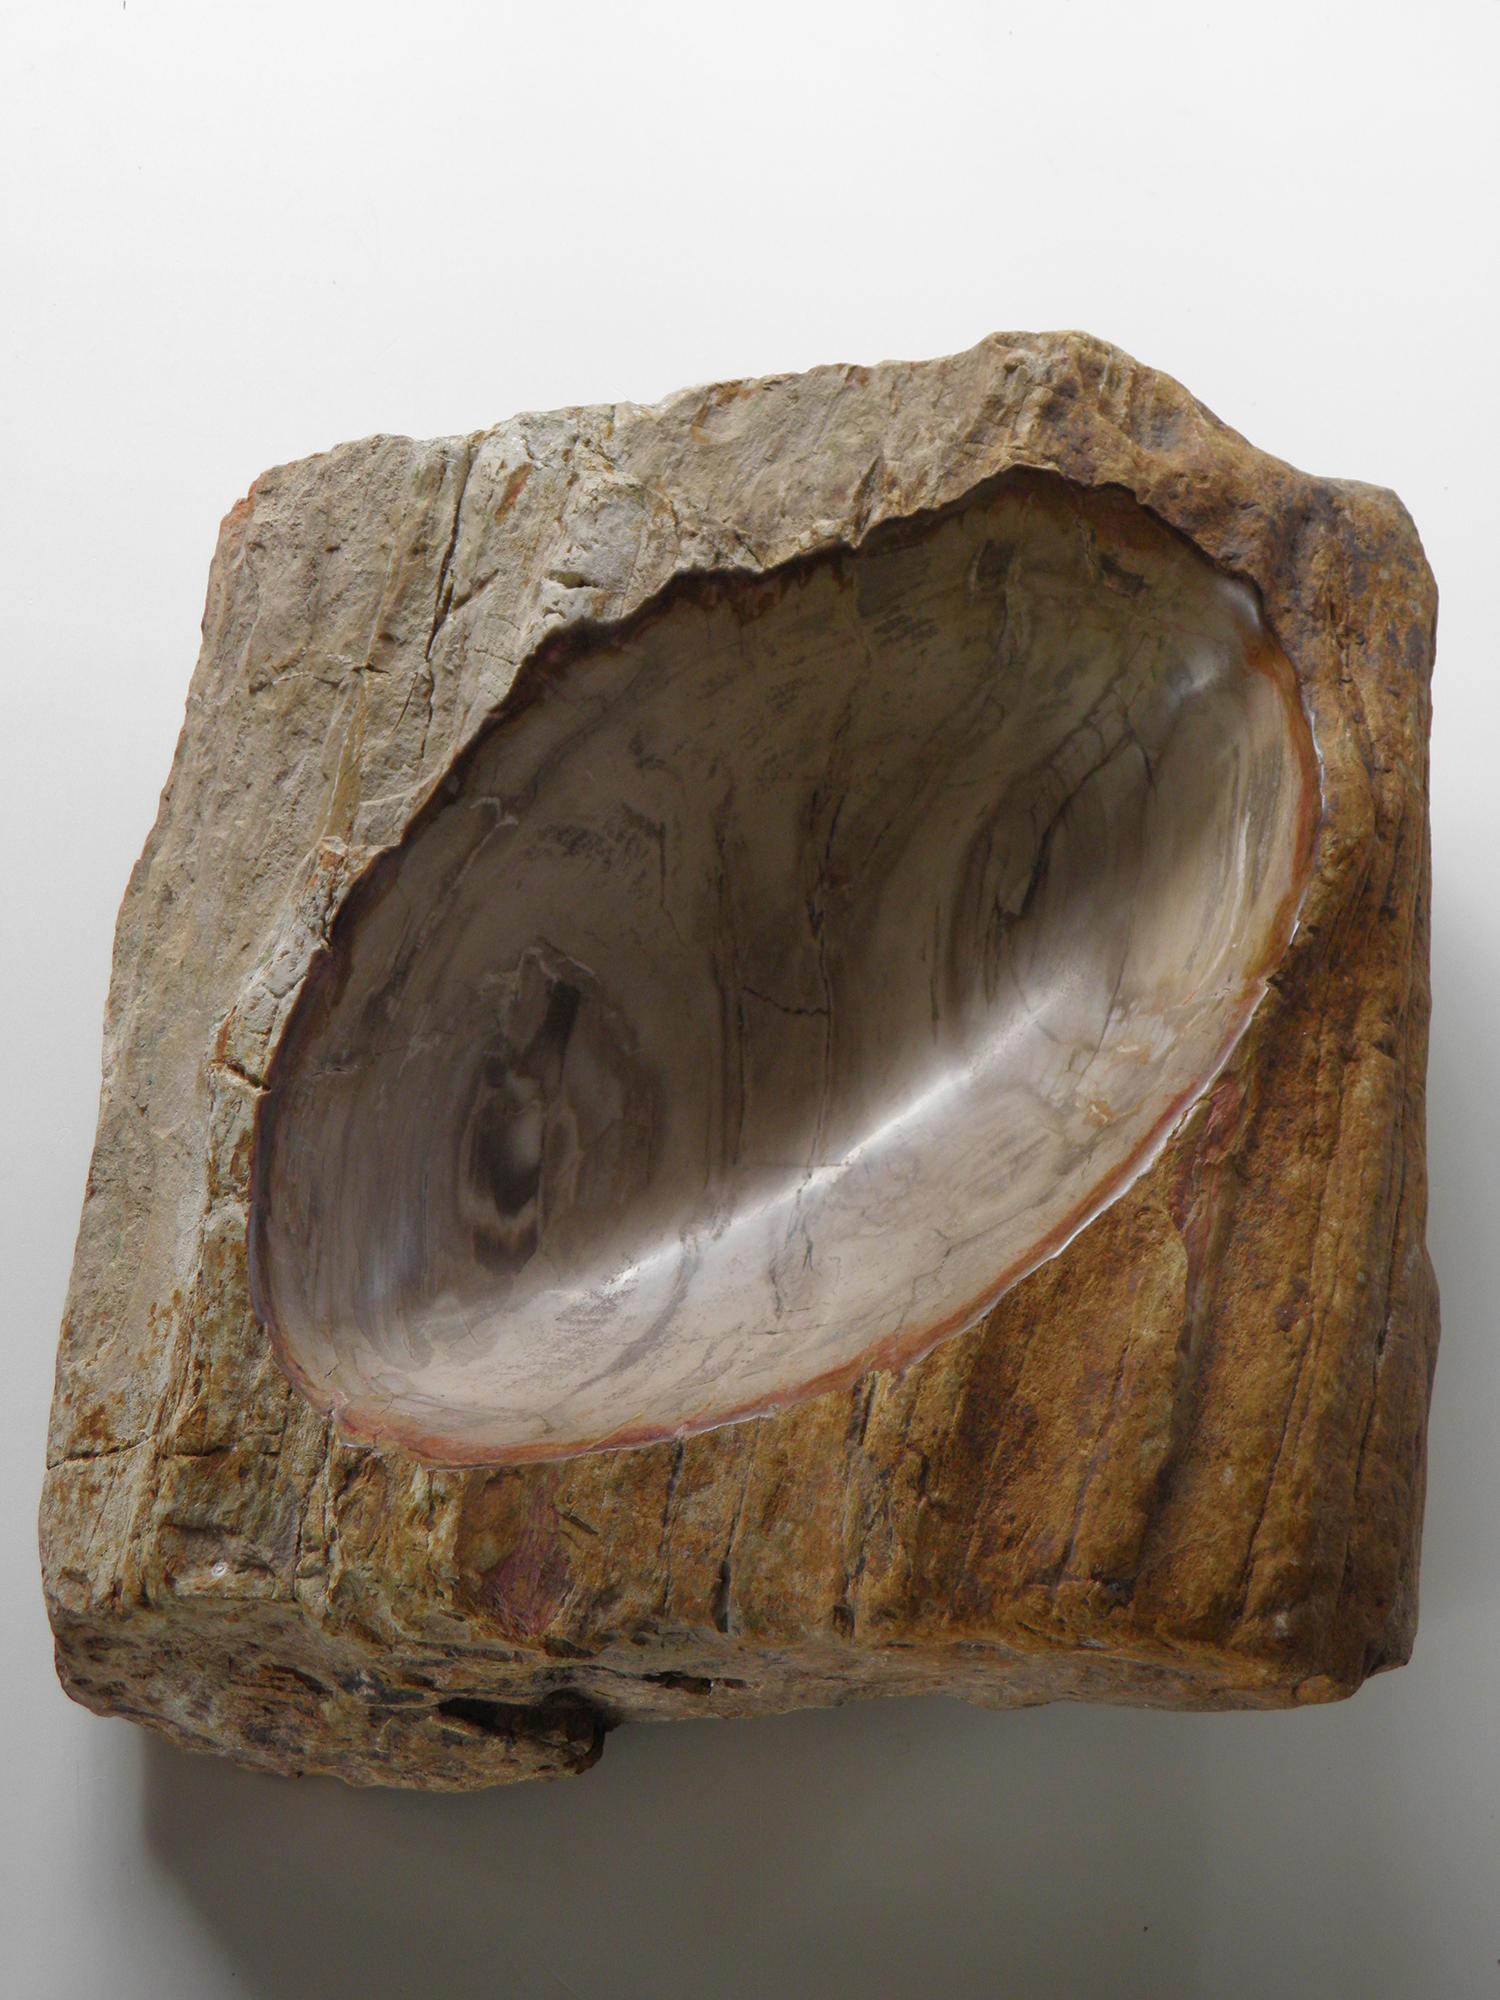 Petrified wood.
Made in 2015